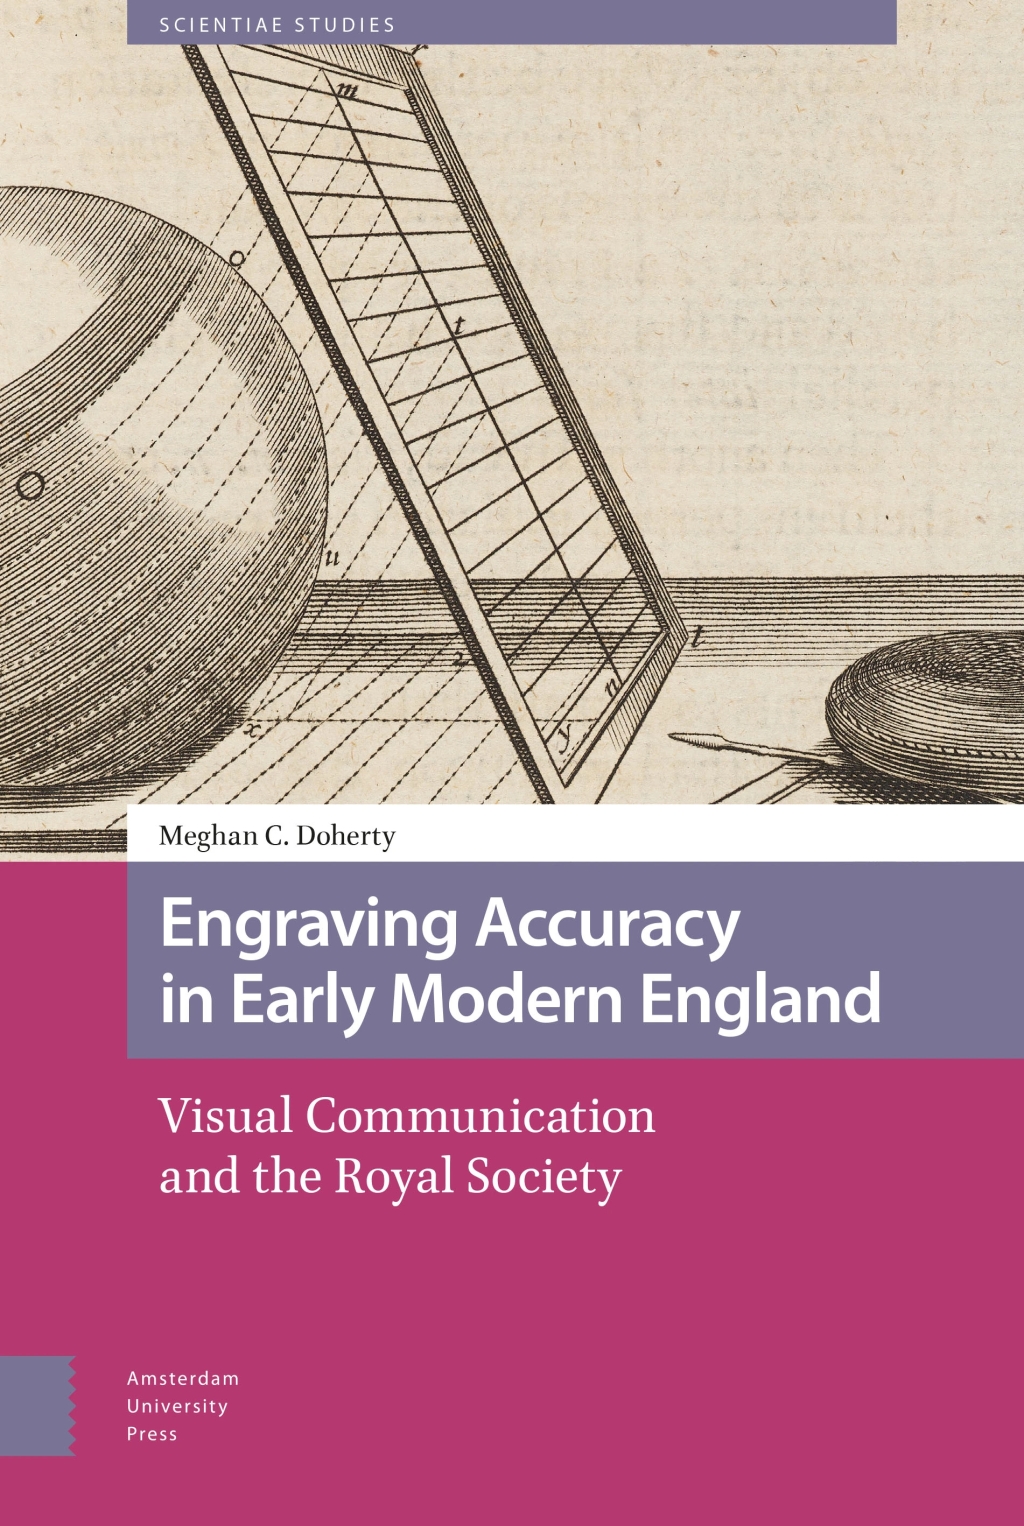 Meghan C. Doherty’s Engraving Accuracy in Early Modern England